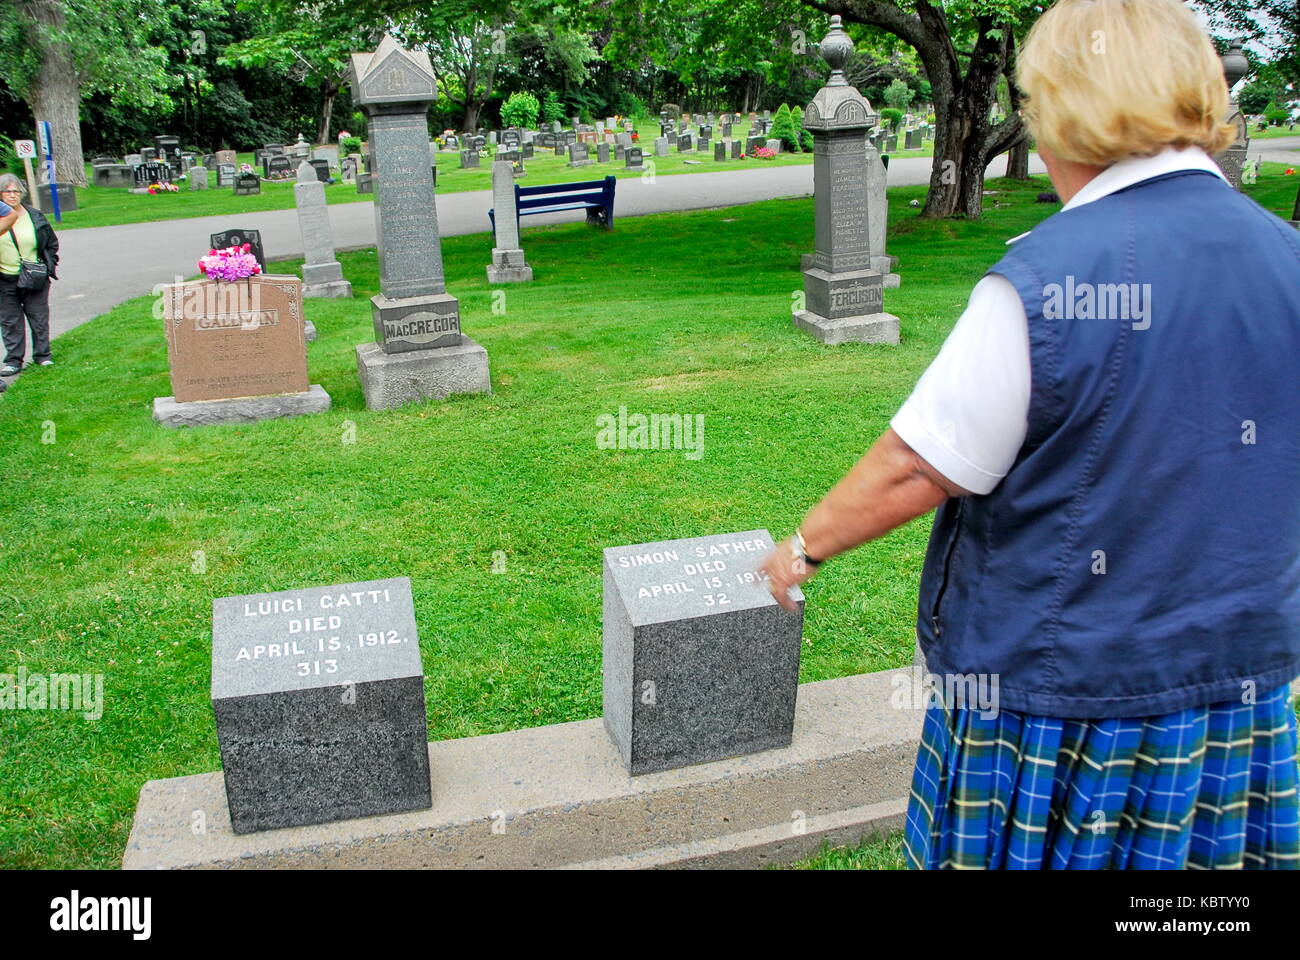 Tombstones at the RMS Titanic Grave Site in Fairview Lawn Cemetery in Halifax, Nova Scotia, Canada Stock Photo